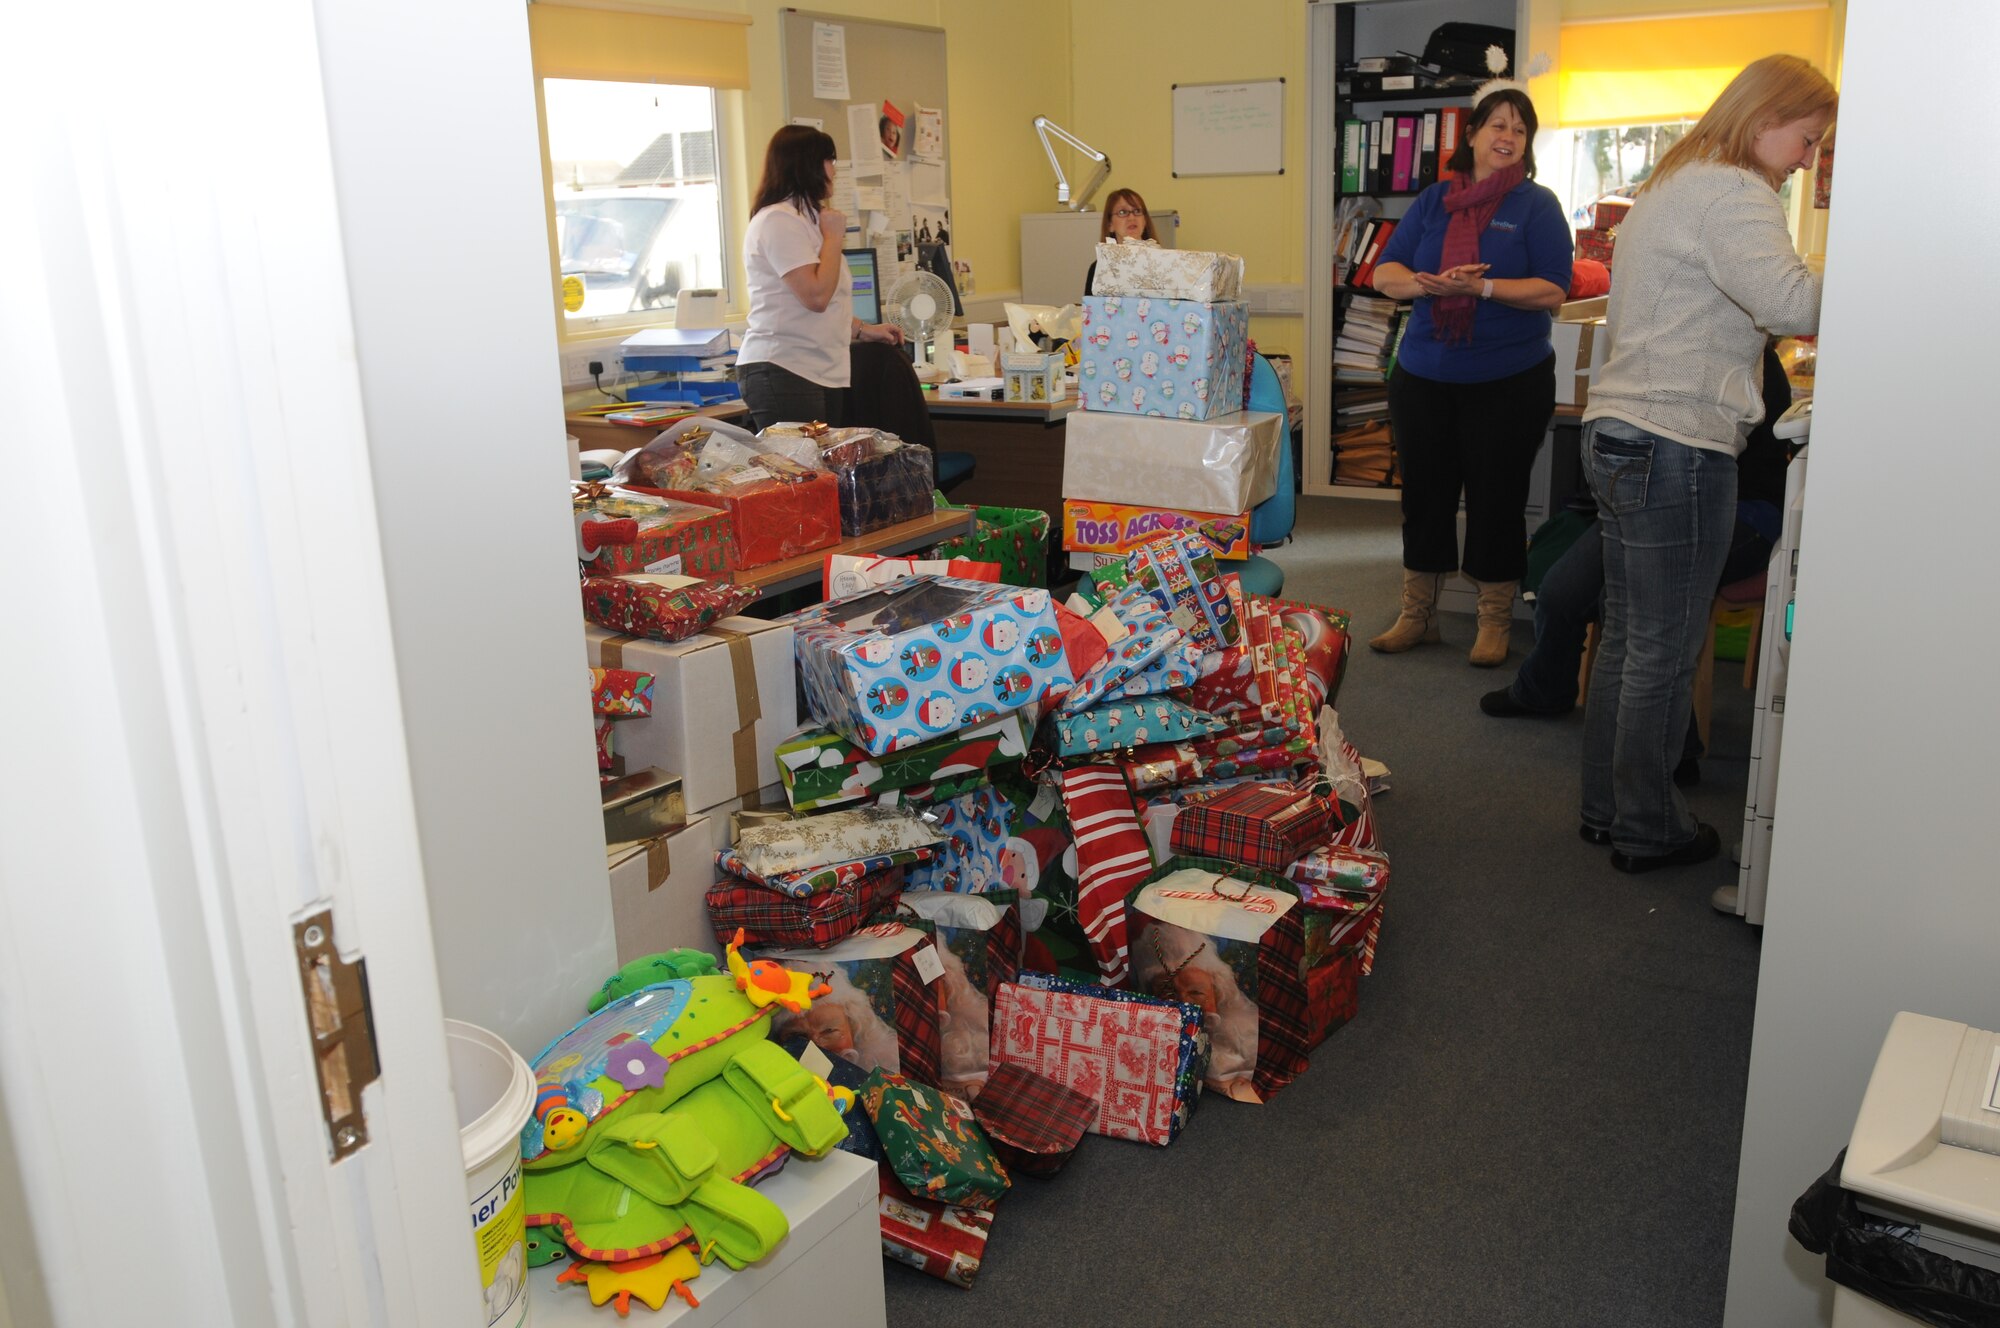 The Sure Start Children’s Centre office is overwhelmed with presents donated by the 48th Fighter Wing. The Christmas presents were collected over a ten-day period and delivered to the children’s centre Dec. 18. (U.S. Air Force photo by Senior Airman Kristopher Levasseur)